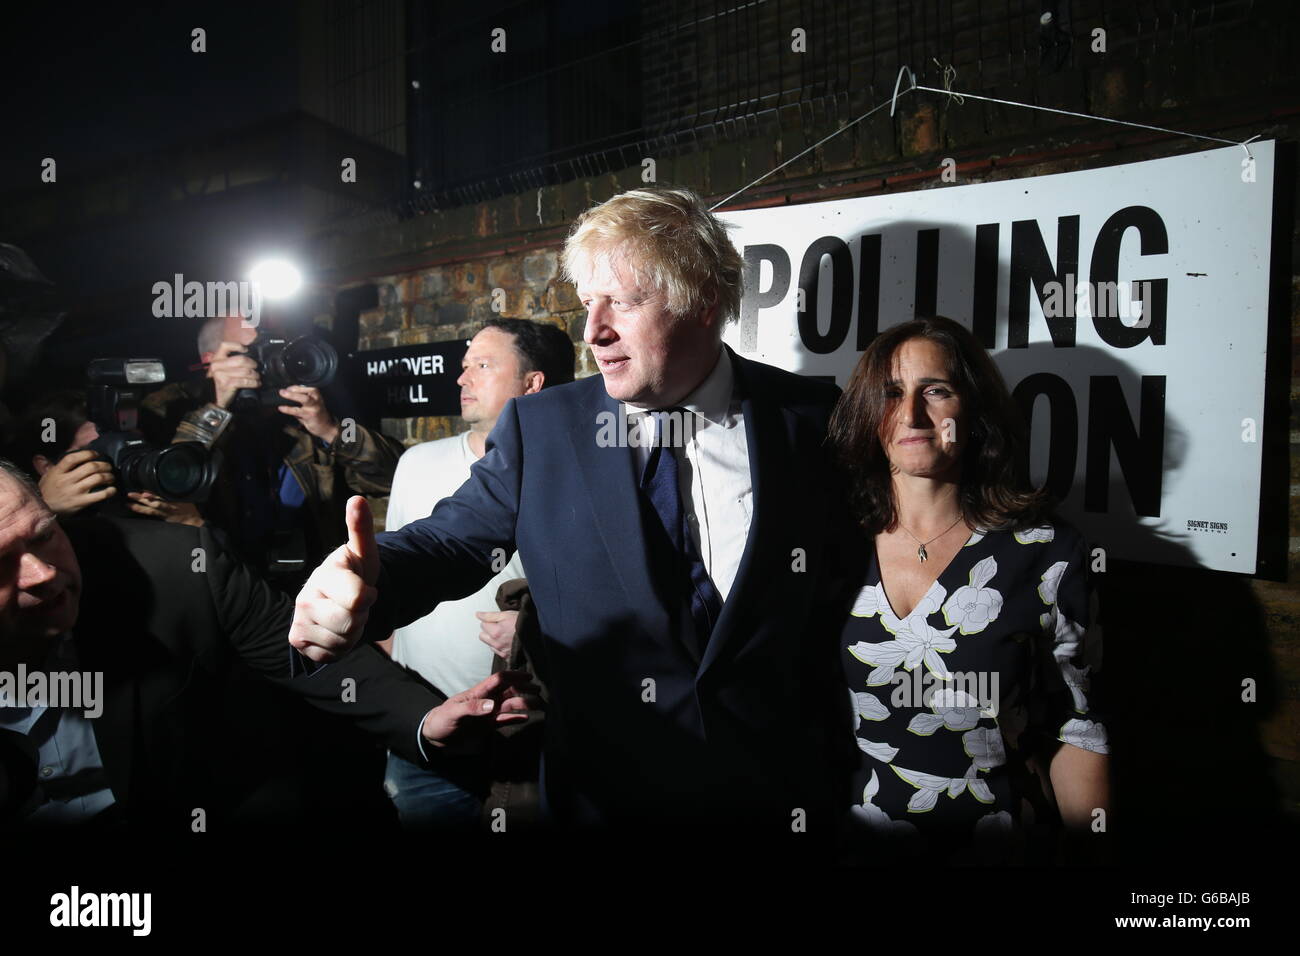 London, Britain. 23rd June, 2016. Boris Johnson (C), former London mayor and supporter of the Leave campaign, and his wife Marina Wheeler (R) exit a polling station after voting in the EU referendum in London, Britain, 23 June 2016. In a referendum on 23 June, Britons have voted by a narrow margin to leave the European Union (EU). Photo: MICHAEL KAPPELER/dpa/Alamy Live News Stock Photo